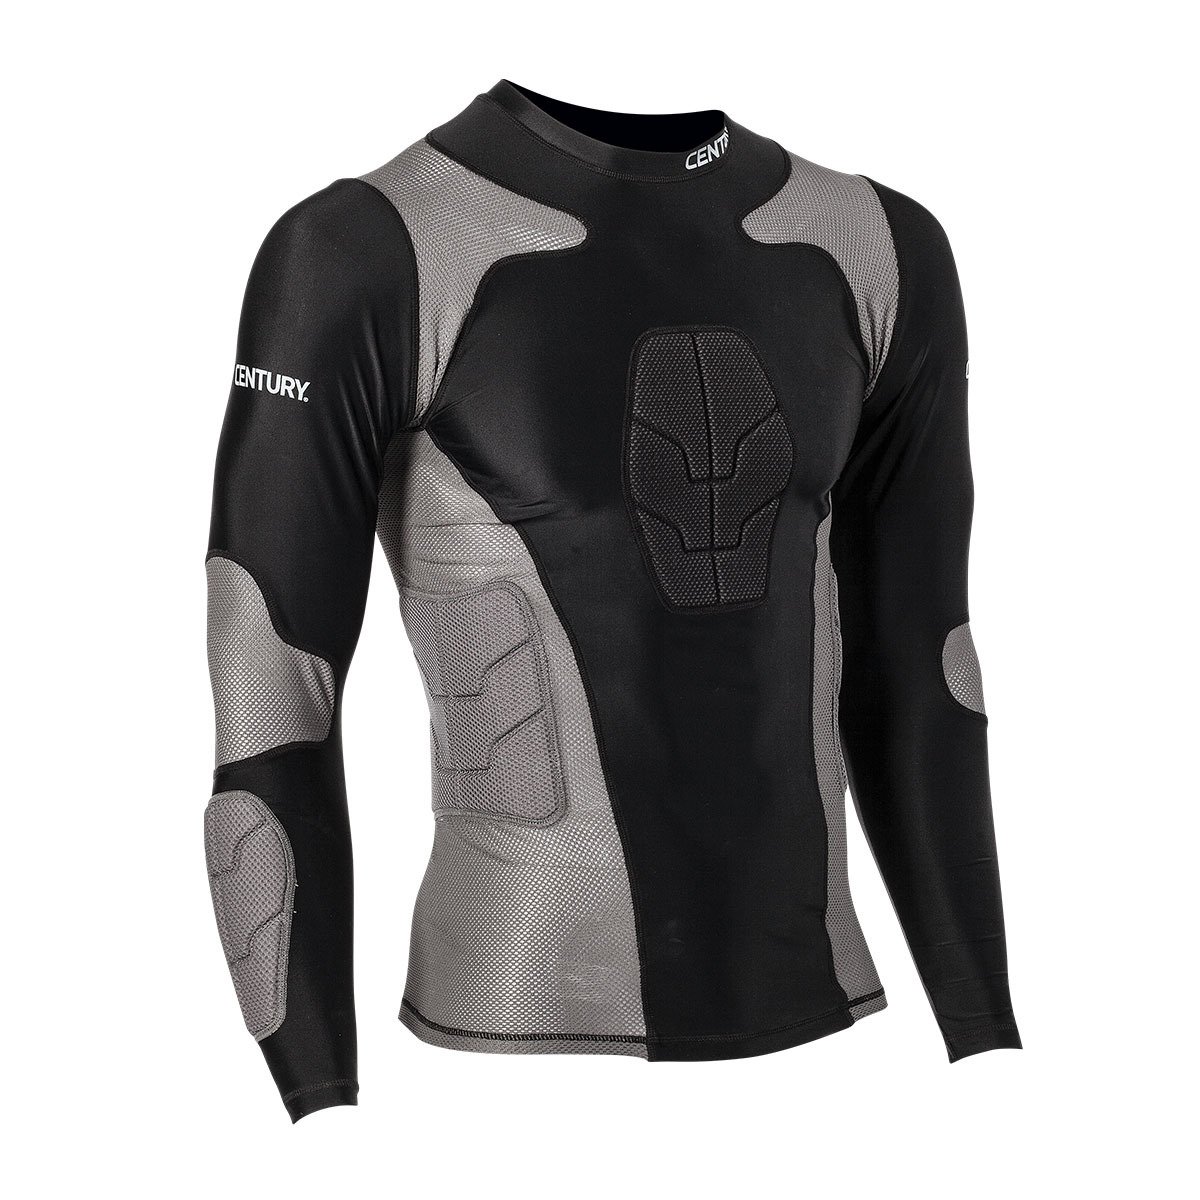 Century Men's Long Sleeve Padded Compression Shirt | Academy